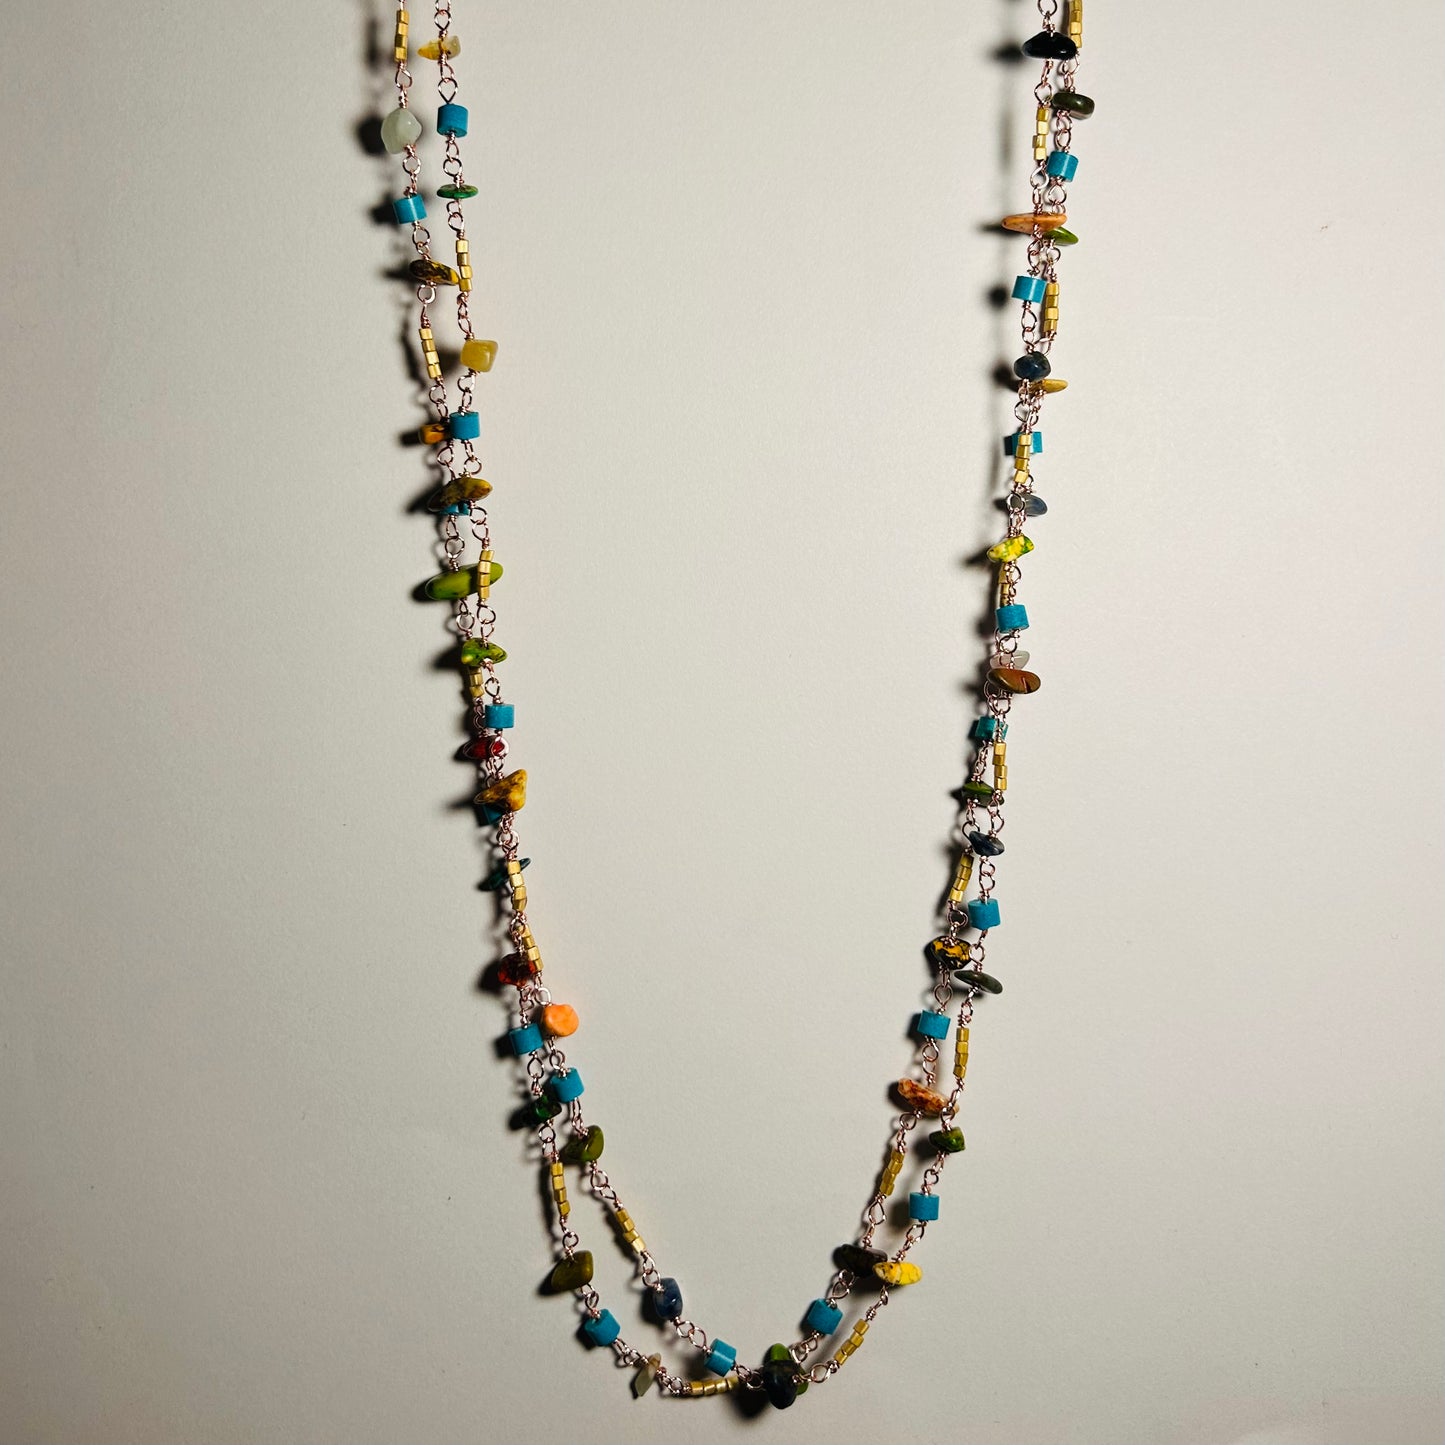 Miner’s Only Daughter, 54.5” Long Chain